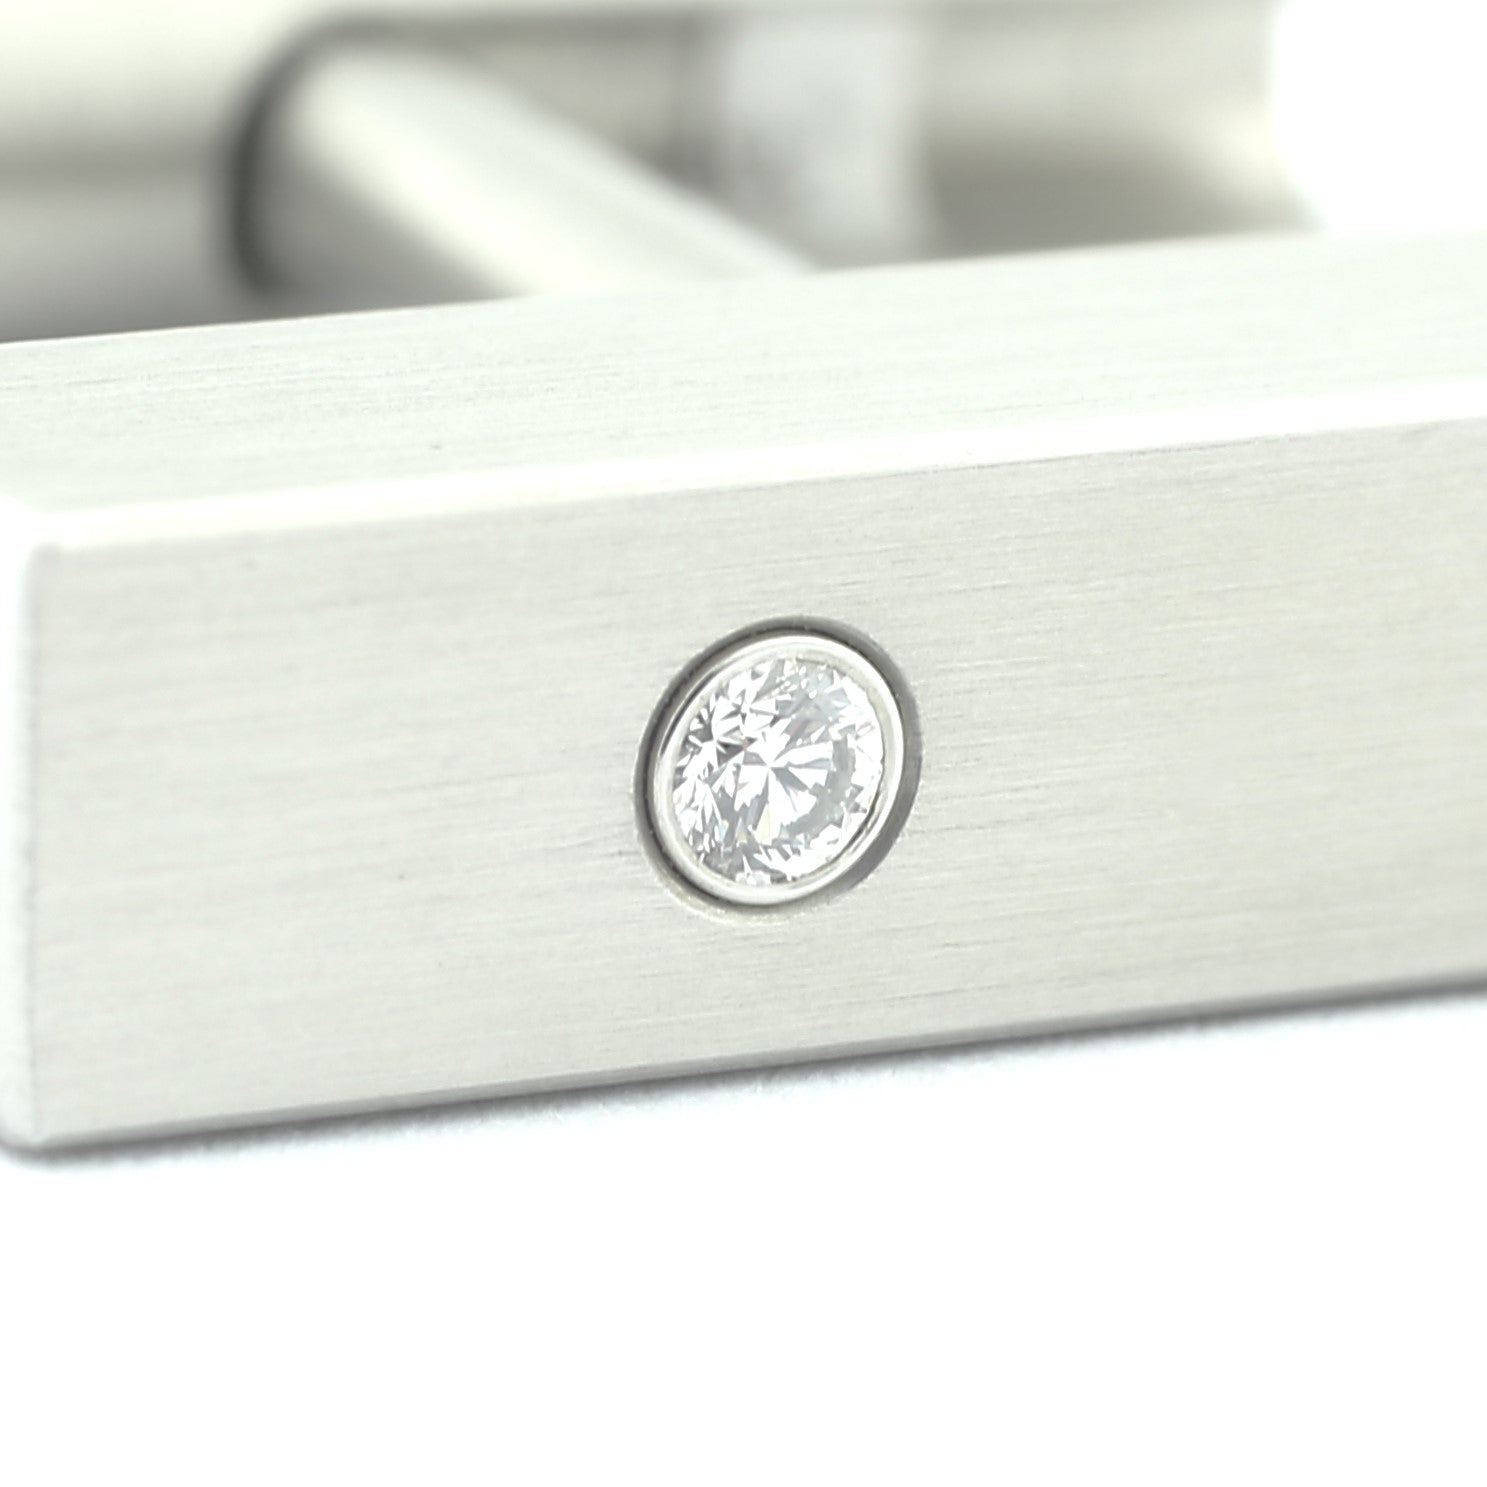 h-bar solid steel with diamond inset cufflinks - detail